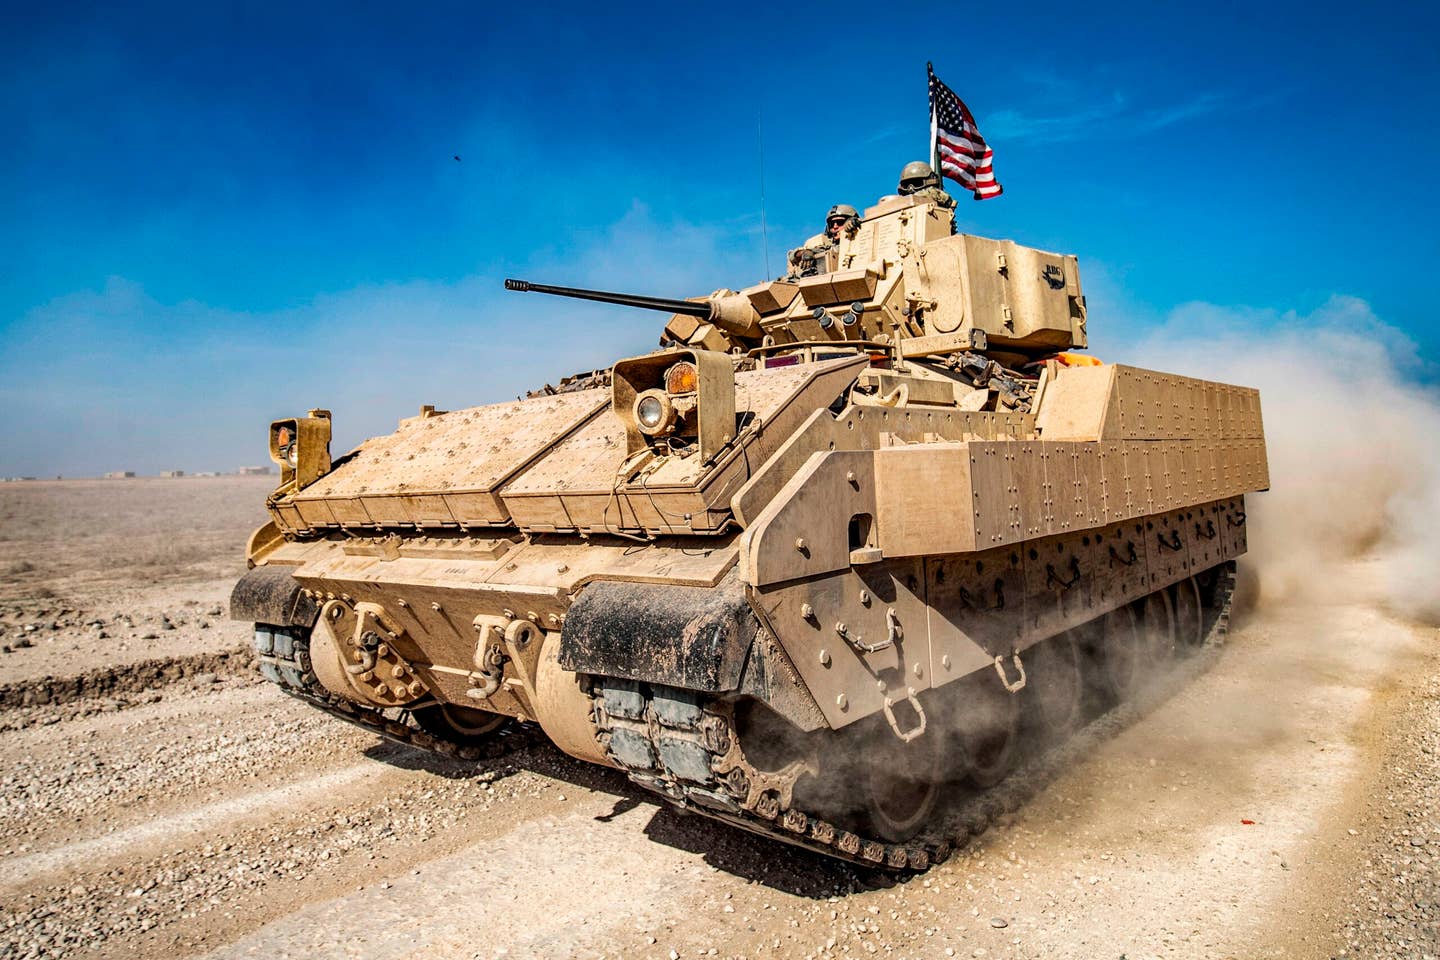 A U.S. Army Bradley Fighting Vehicle (BFV) patrols in the Suwaydiyah oil fields in Syria's northeastern Hasakah province on Feb. 13, 2021. (Photo by Delil SOULEIMAN / AFP) (Photo by DELIL SOULEIMAN/AFP via Getty Images)